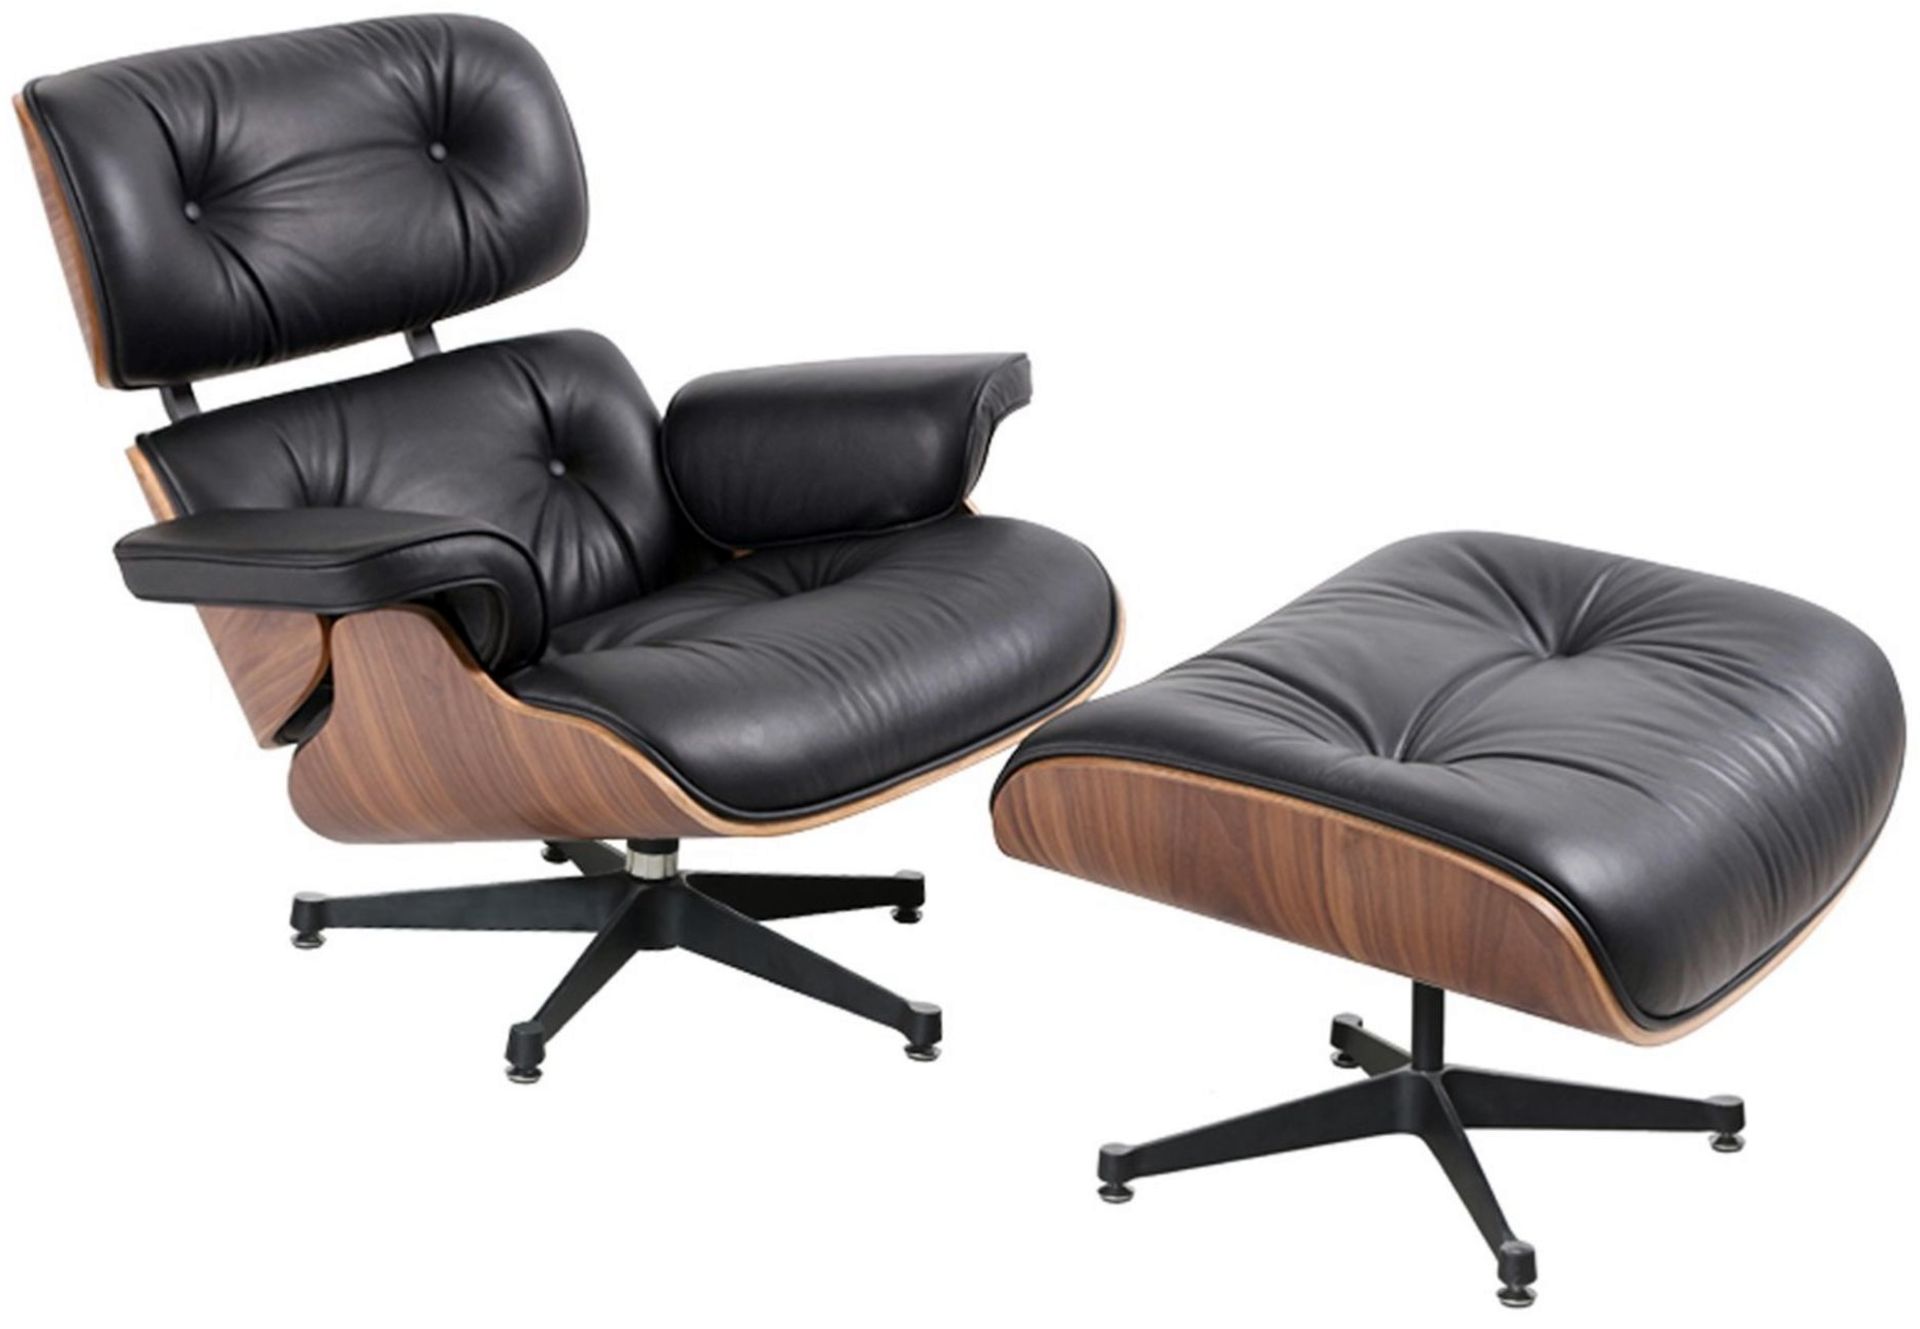 1 x Eames Inspired Lounge Chair With Matching Ottoman Footrest - Timeless Retro Design With Black